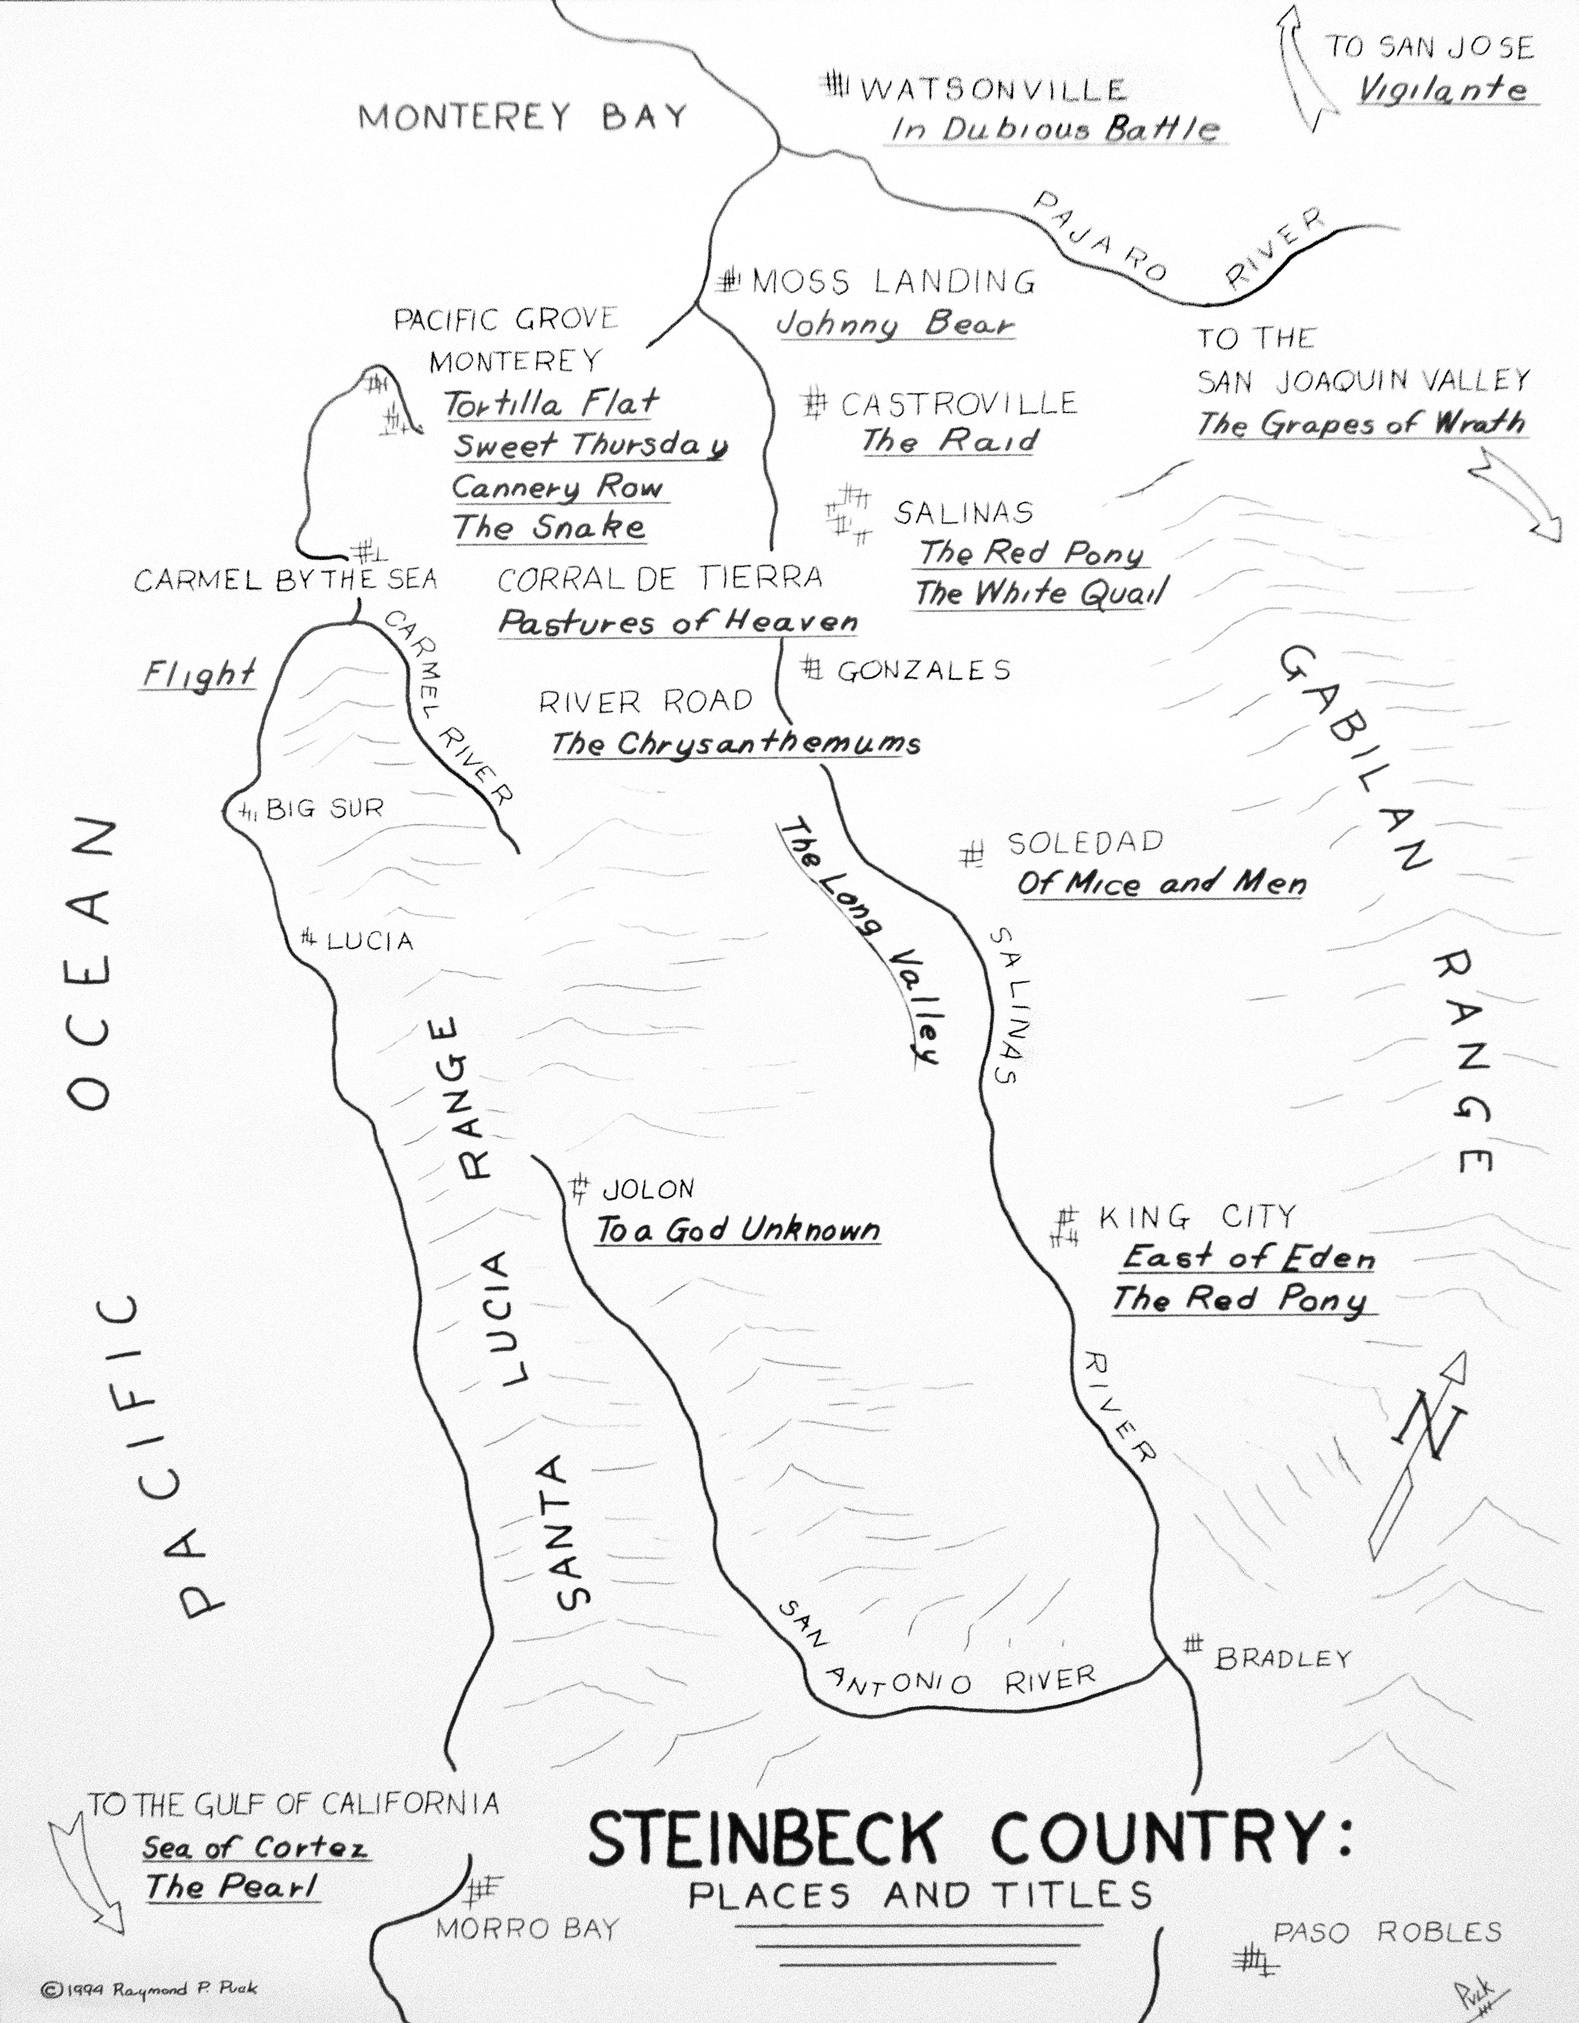 Steinbeck country map showing places in CA corresponding with Steinbeck's works